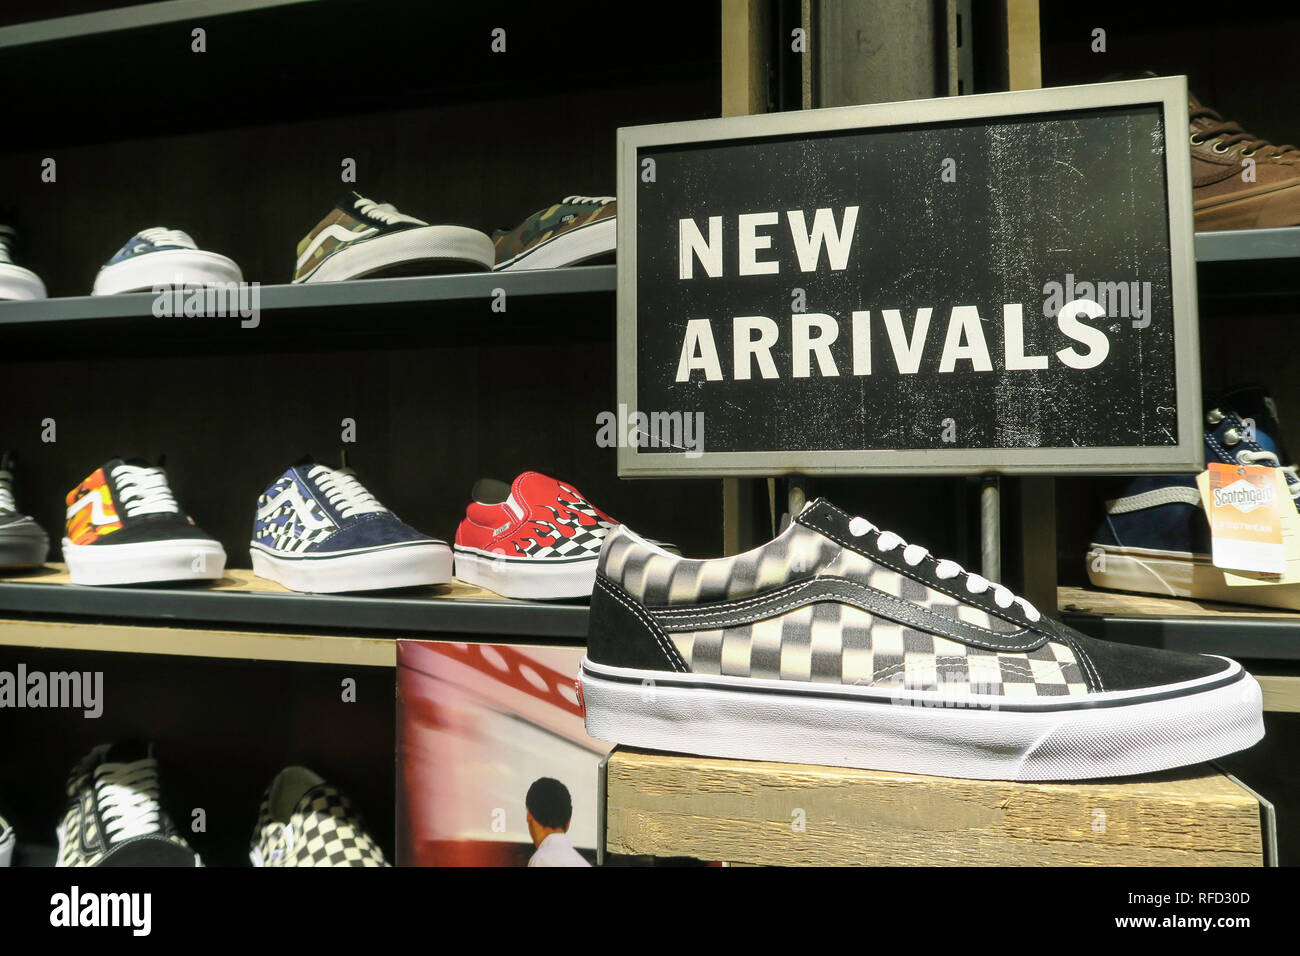 Vans is a skateboard shoe and apparel retailer with a store on 34th Street,  NYC, USA Stock Photo - Alamy